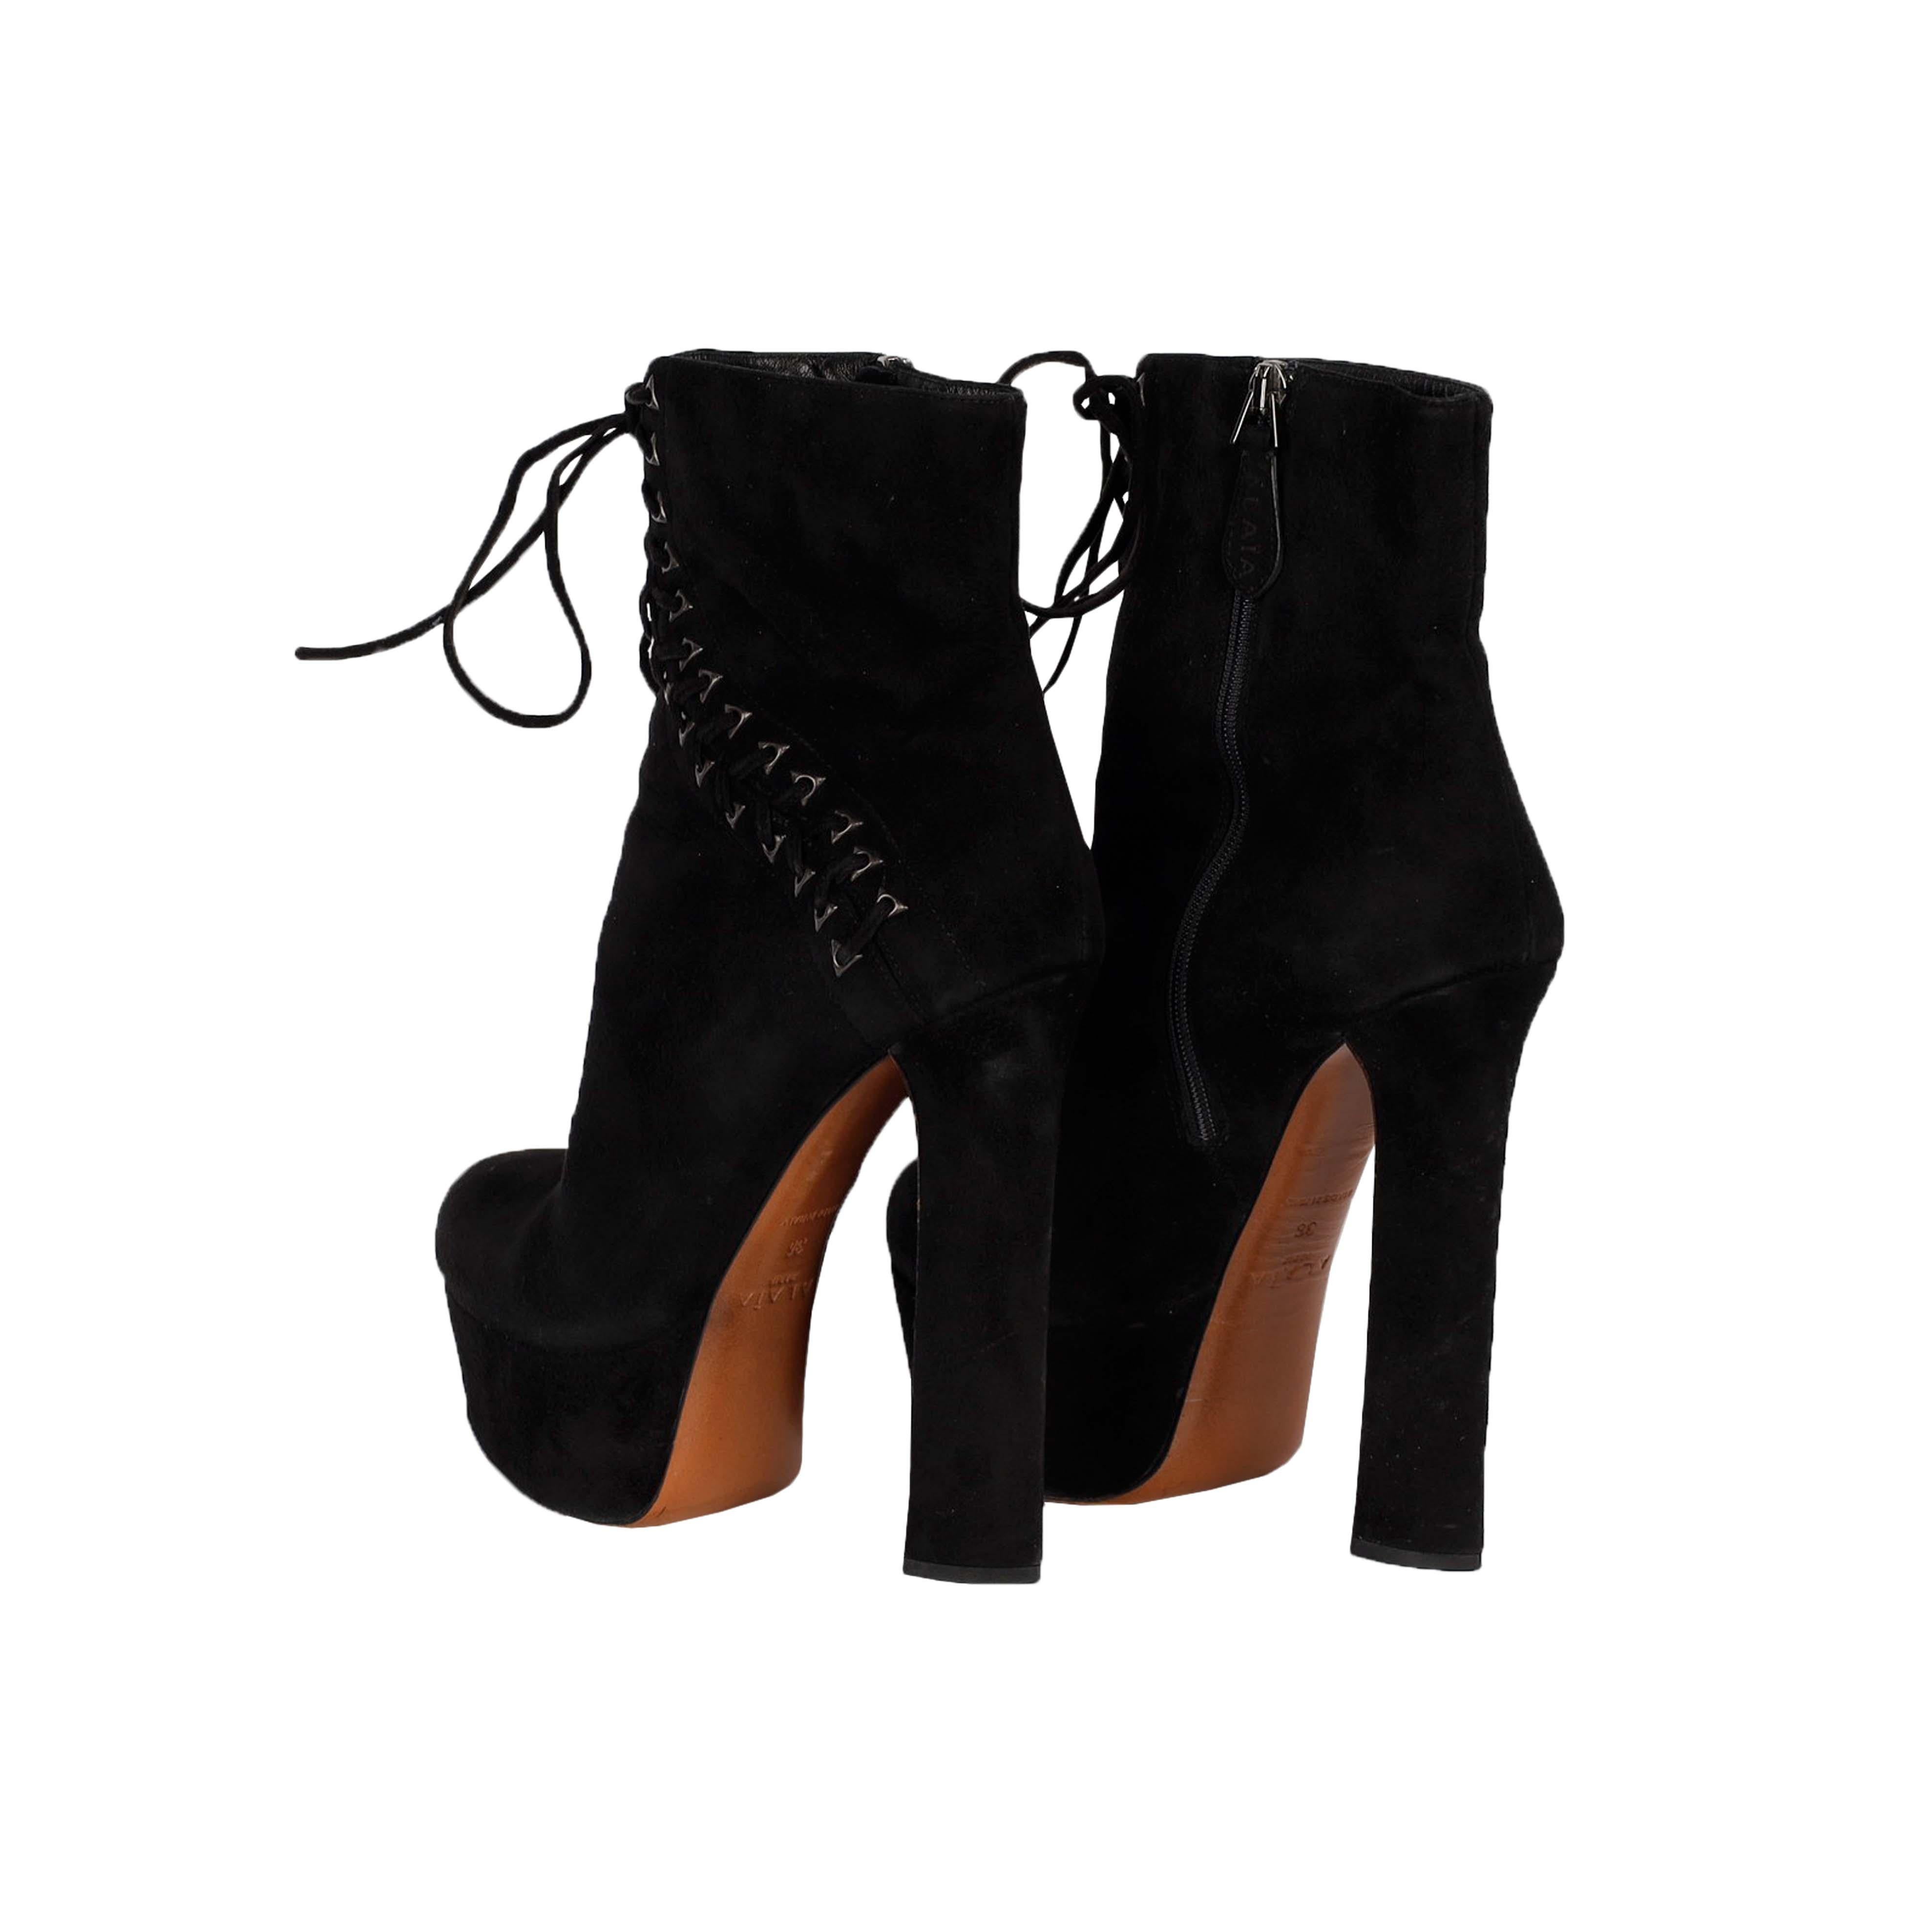 Women's Black Suede Lace-up Corset Booties- For Sale